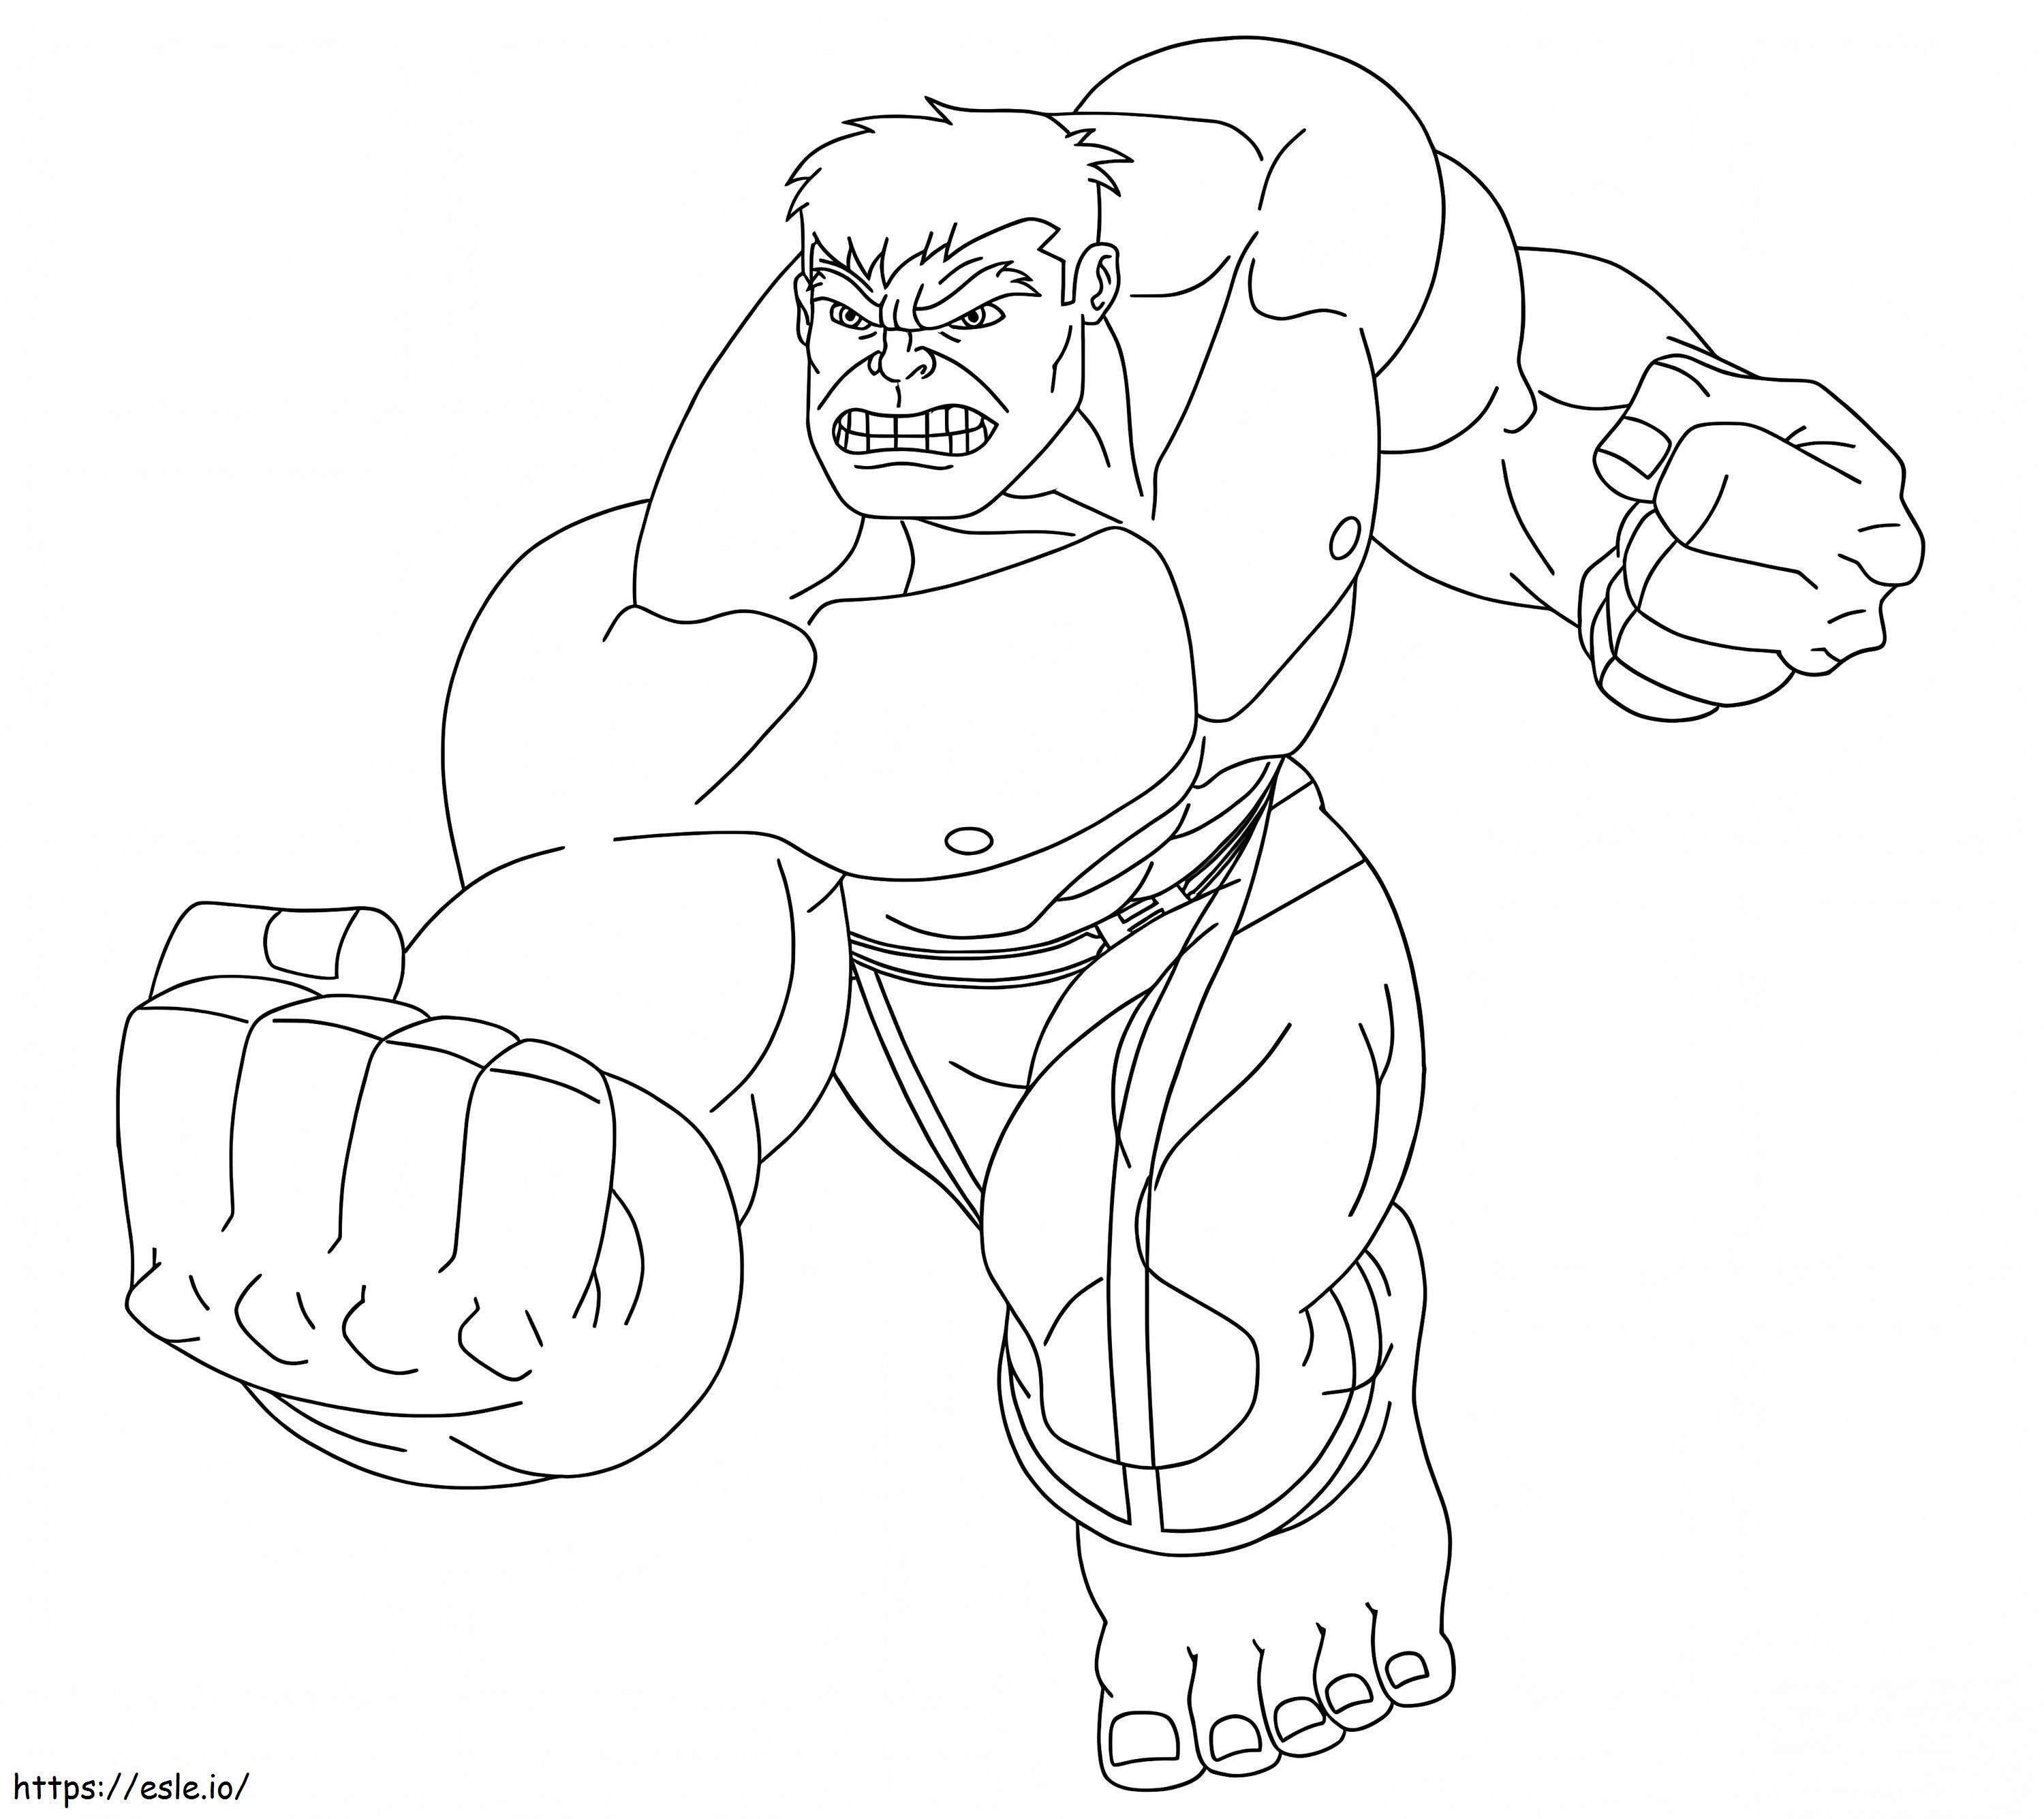 Hulk Poinconnage coloring page